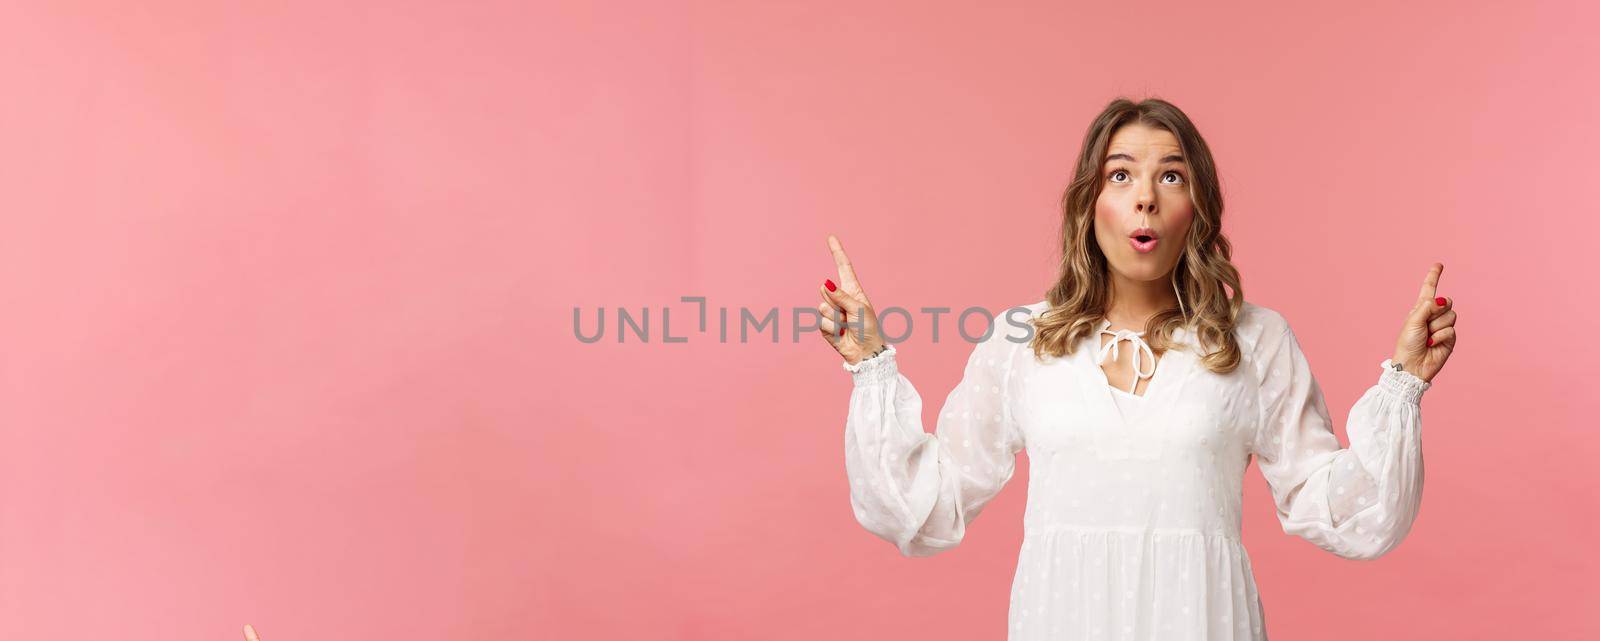 Excited beautiful caucasian blond woman in white dress, fold lips in excitement, looking pointing fingers up at something stunning and breathtaking, enjoying view, pink background.